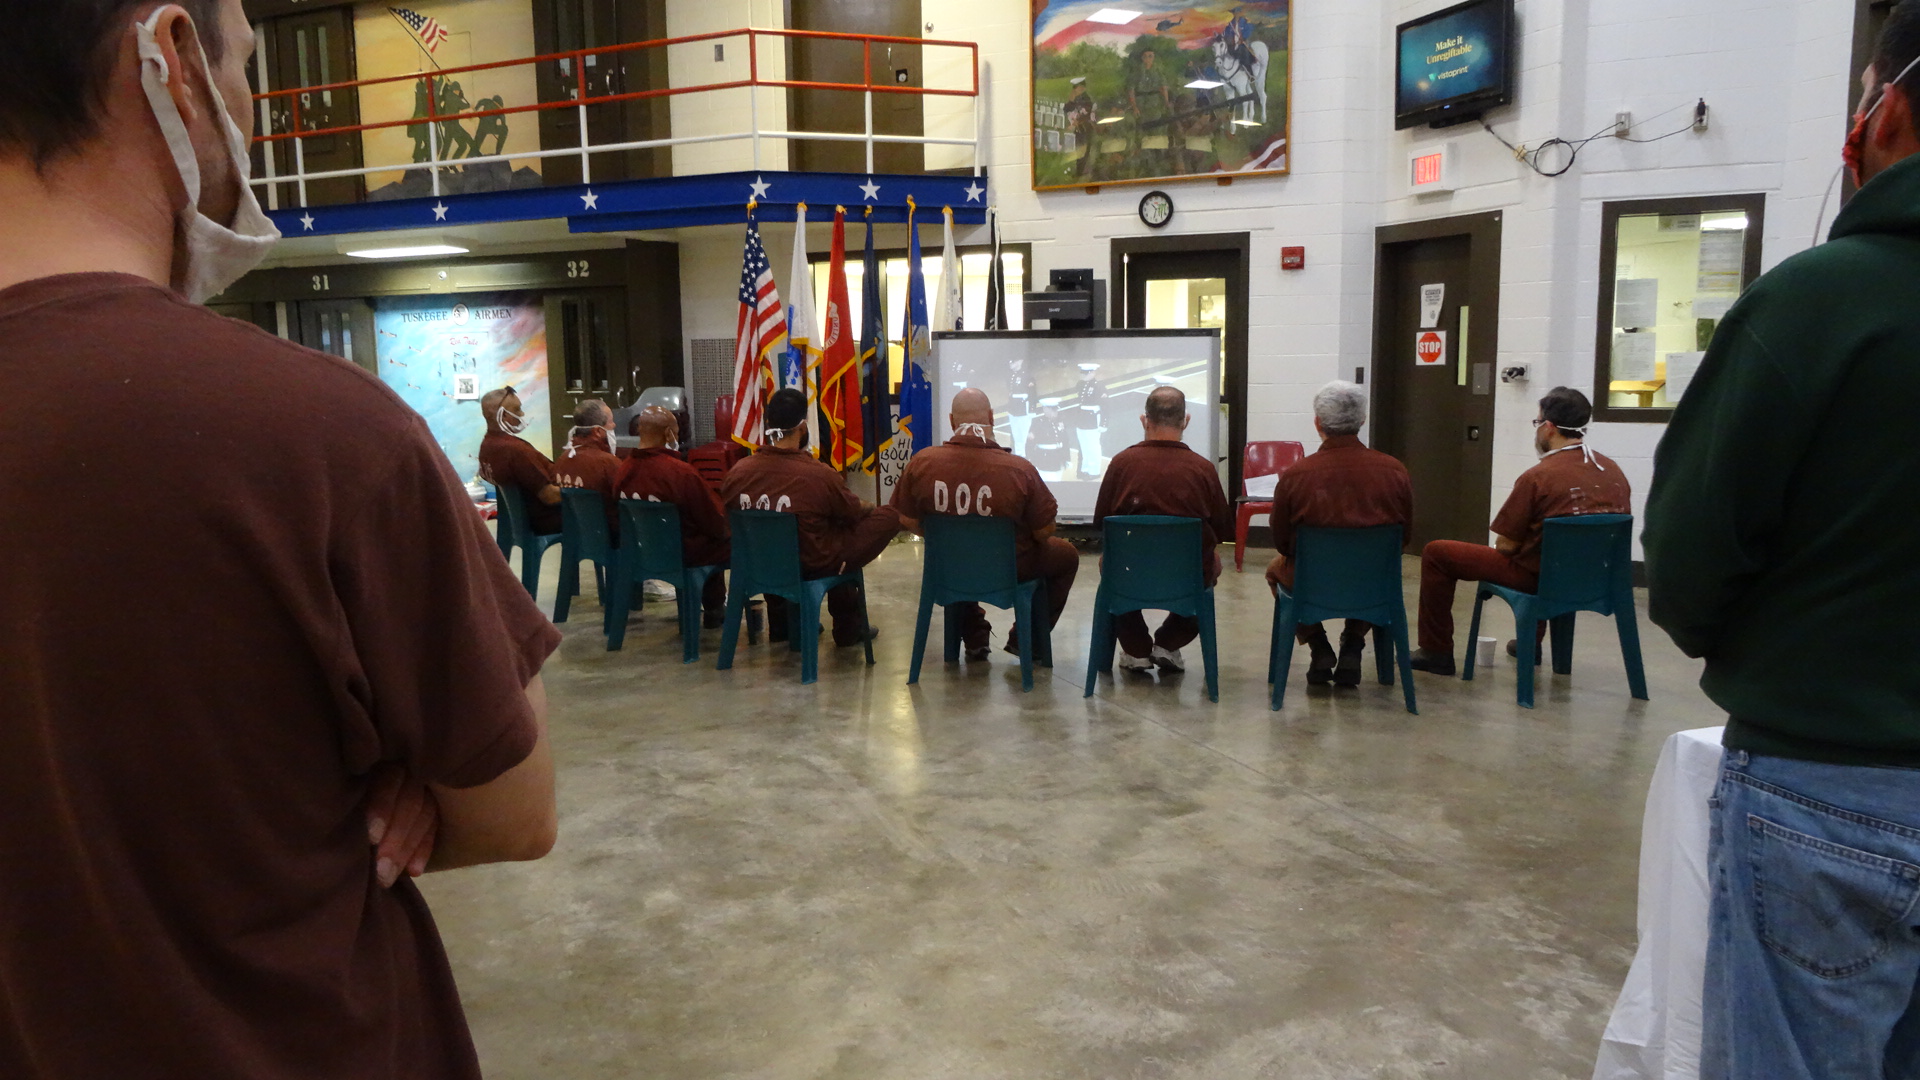 Inmates watch military drill on a projector